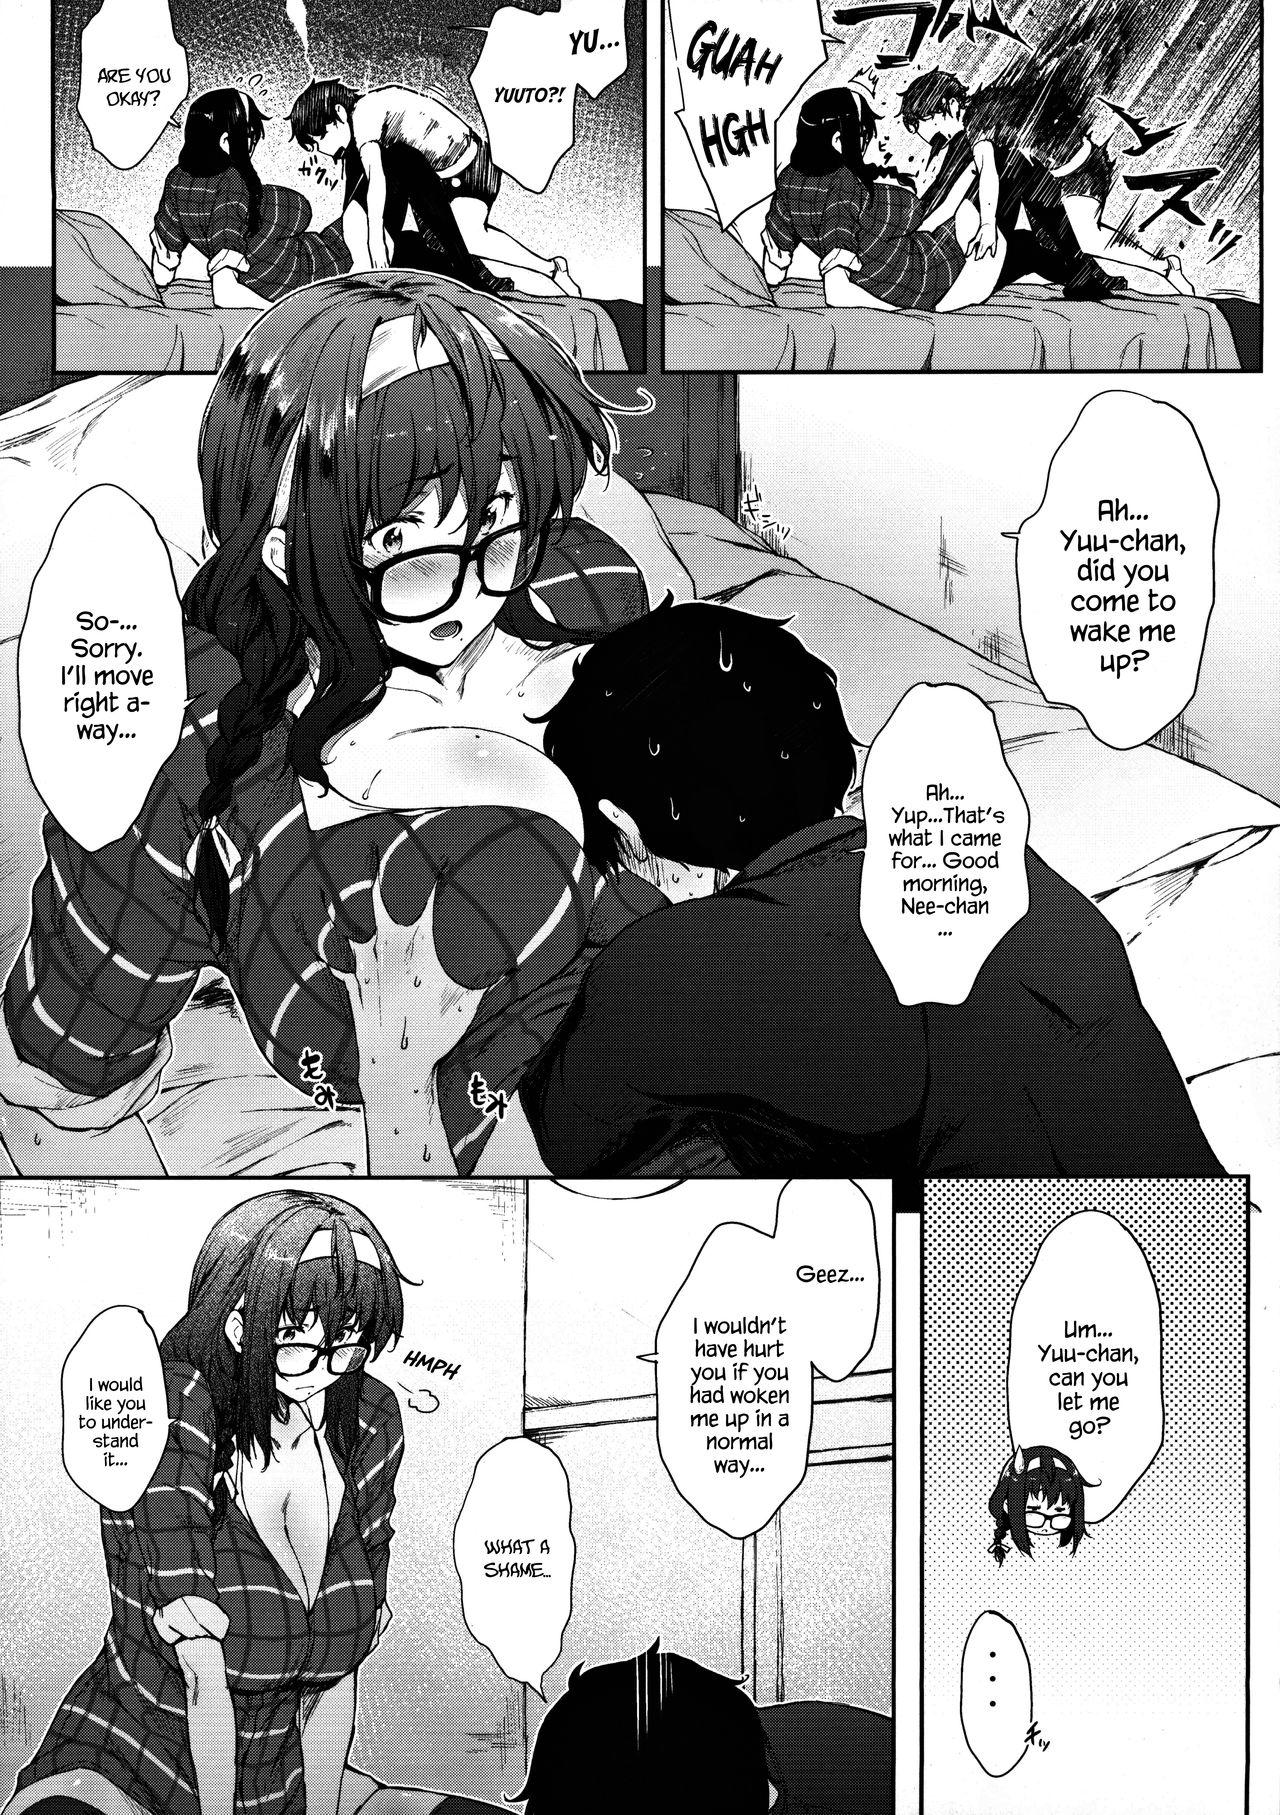 Plug Babaa no Inu Ma ni Nee-chan to | With My Stepsister While My Mom's Not Home - Original Amateur Teen - Page 5